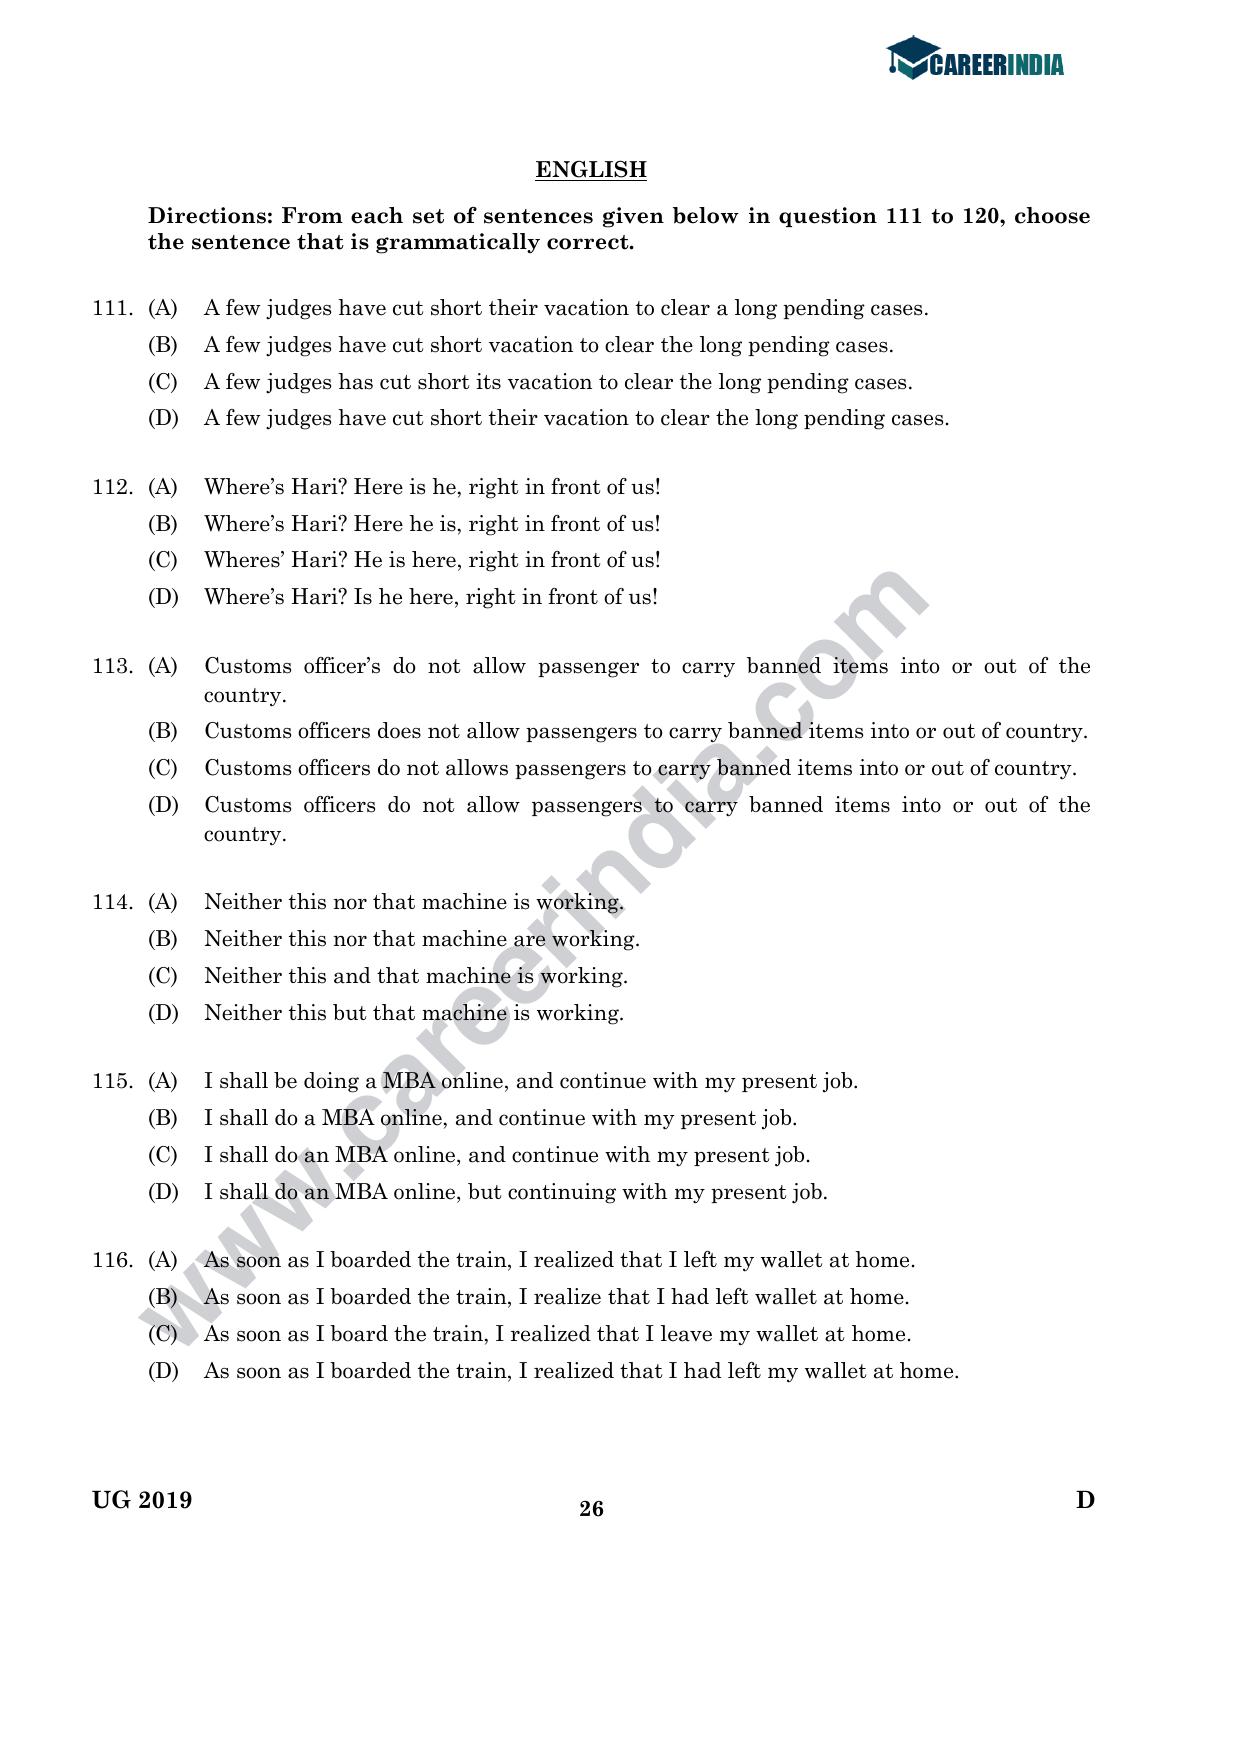 CLAT 2019 UG Logical-Reasoning Question Paper - Page 25